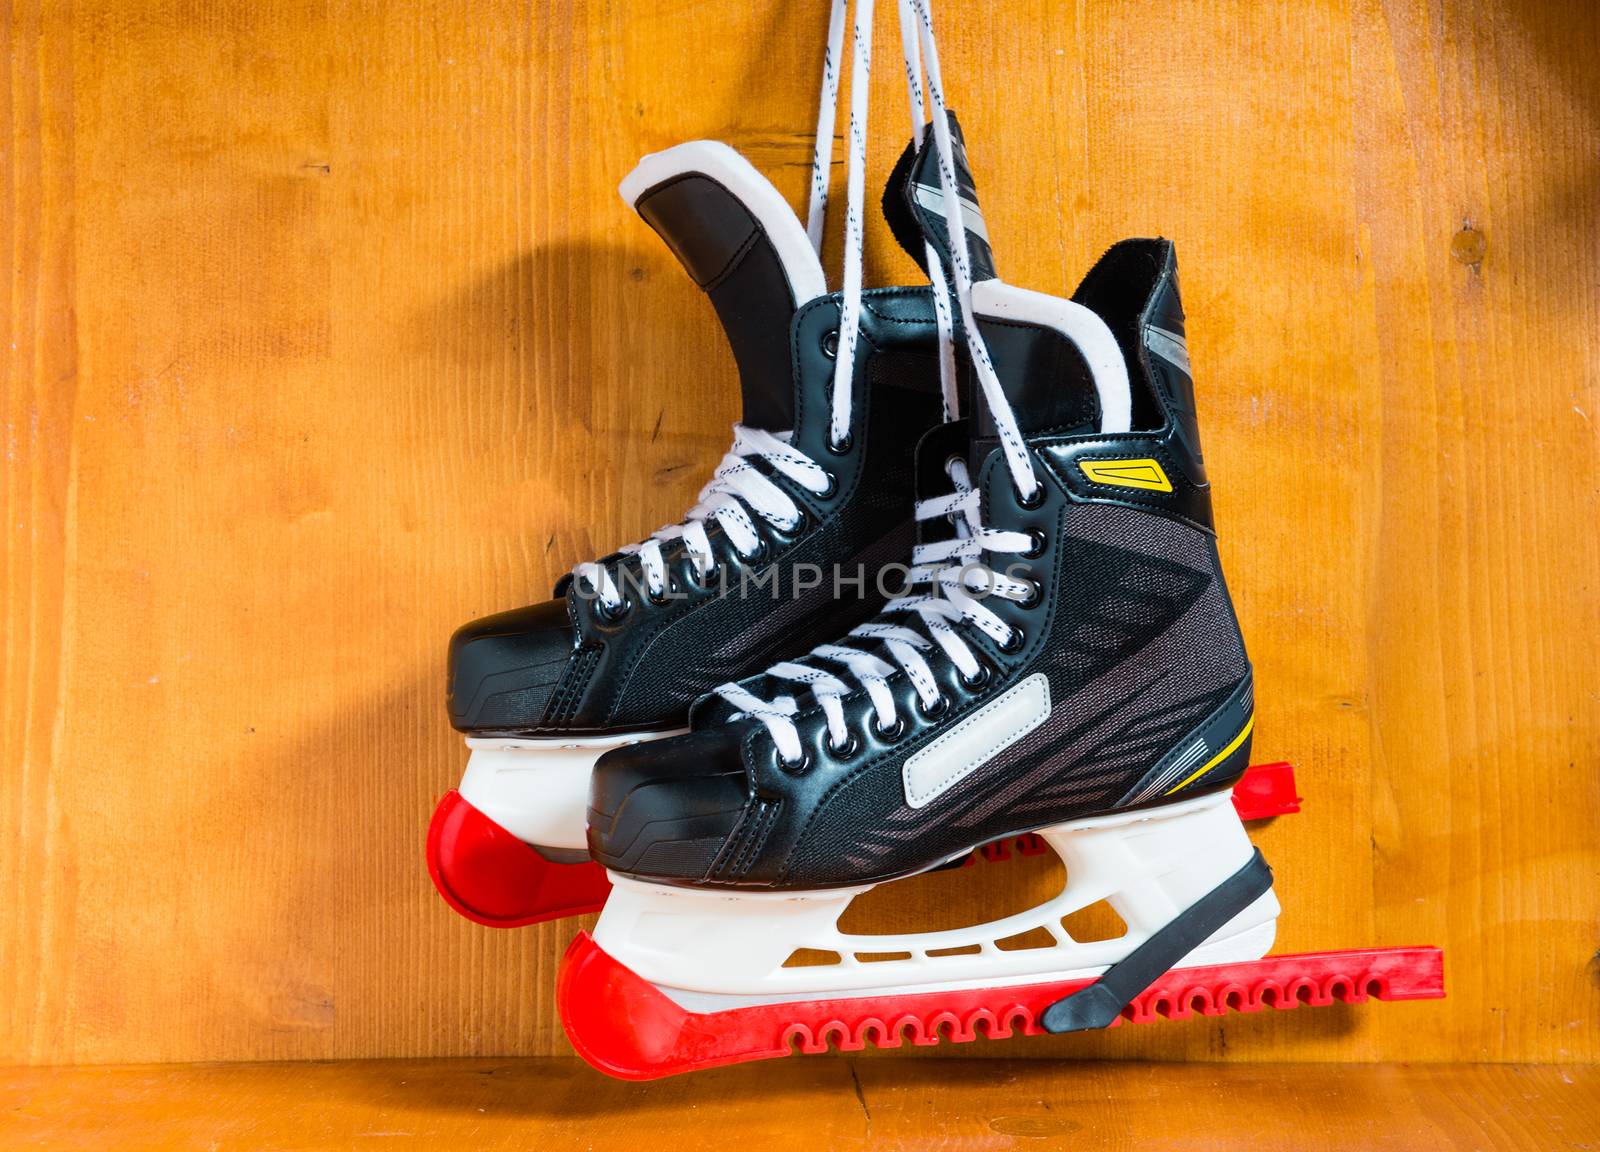 Professional hockey skates with red protective covers, against the wooden background

